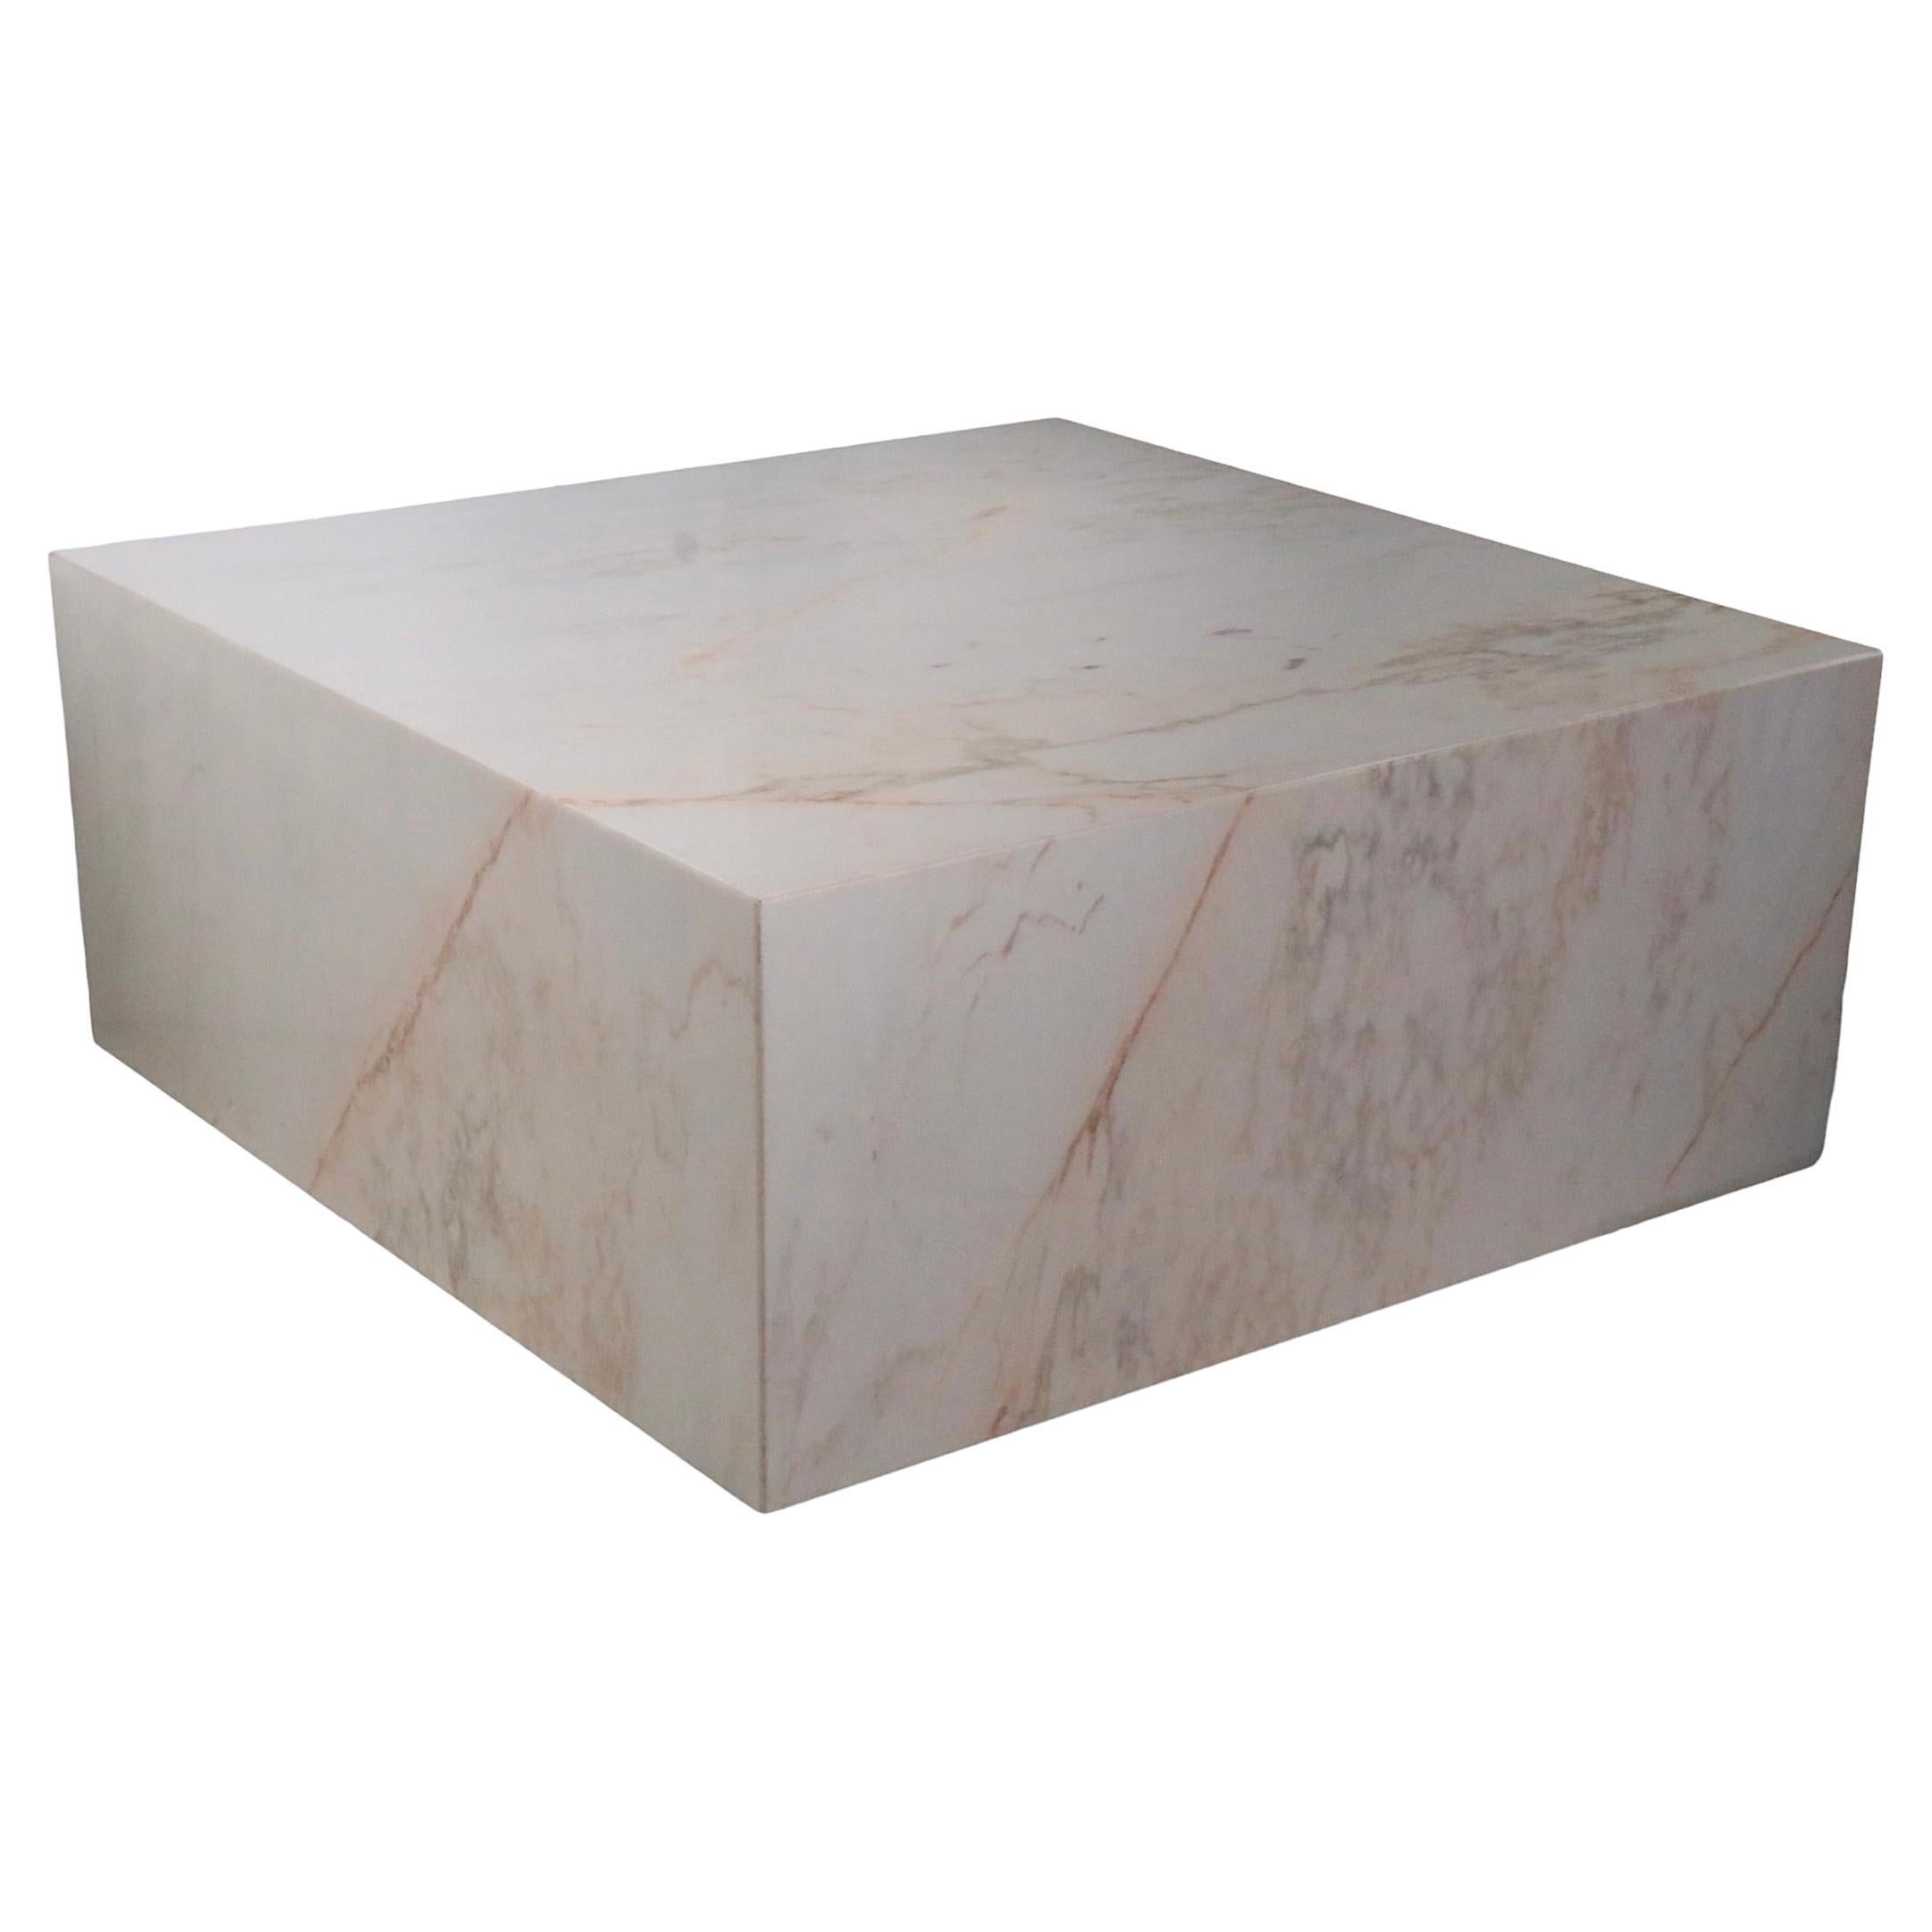 Post Modern Square Marble Coffee Tables, circa 1970s, Pair Available